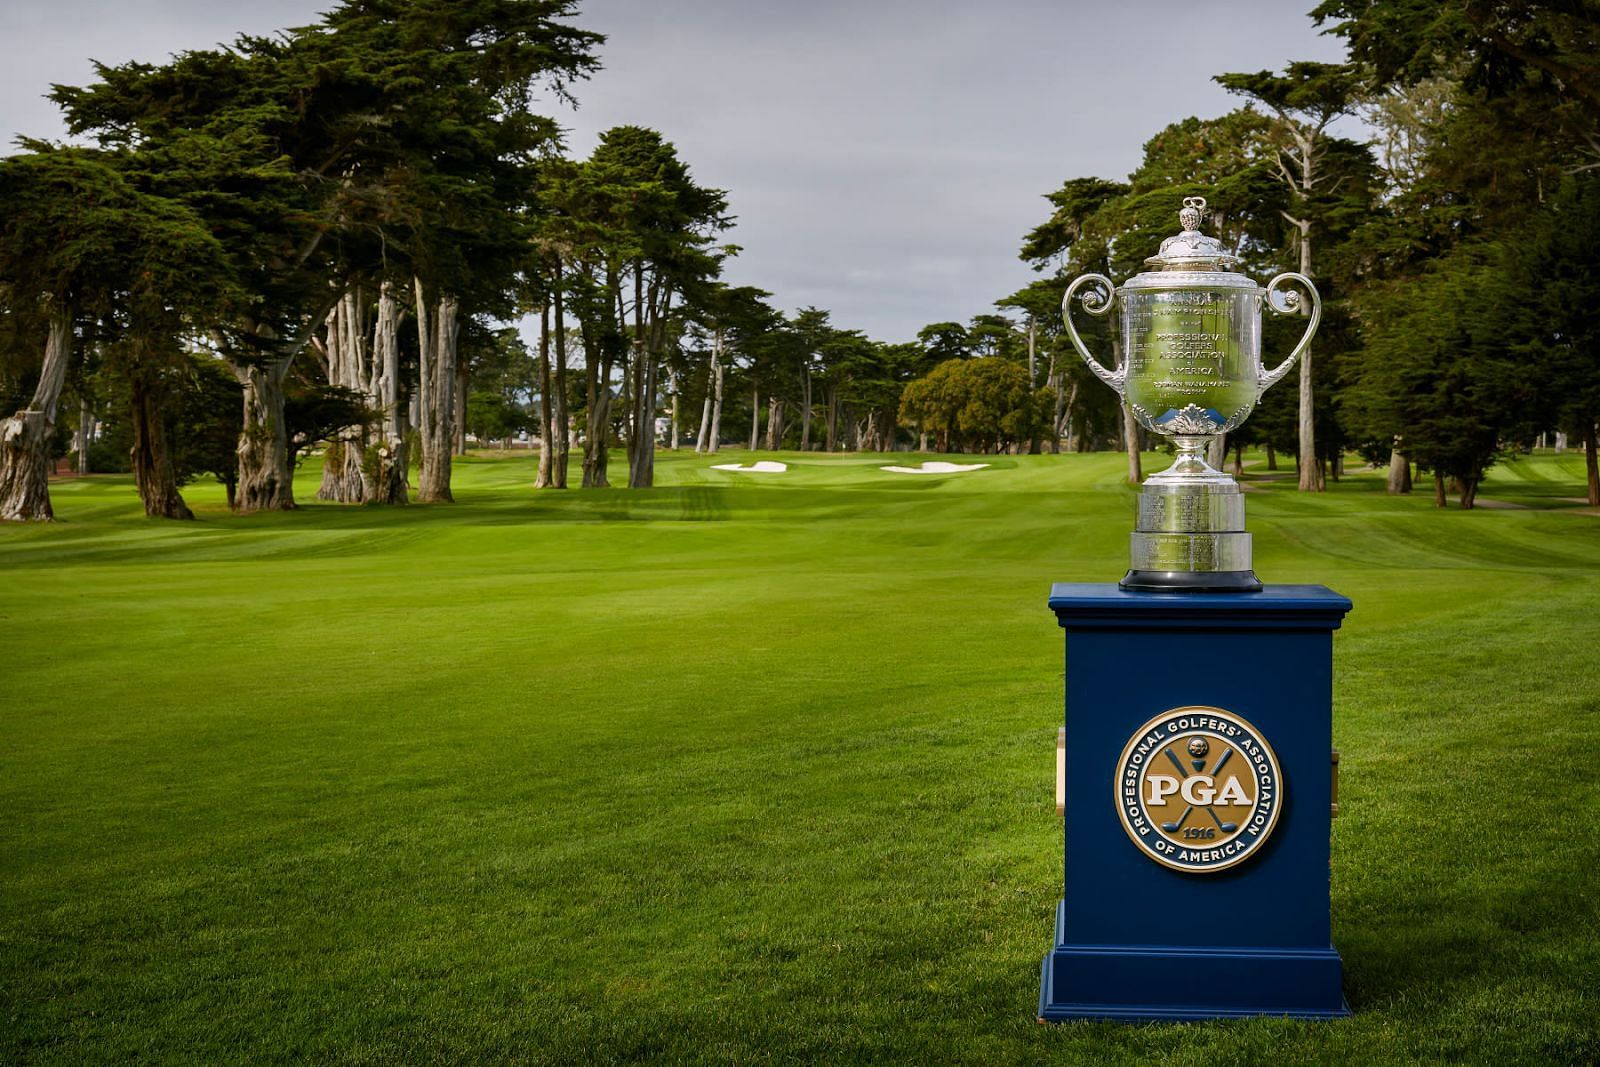 How do you qualify for the PGA Professional Championship?